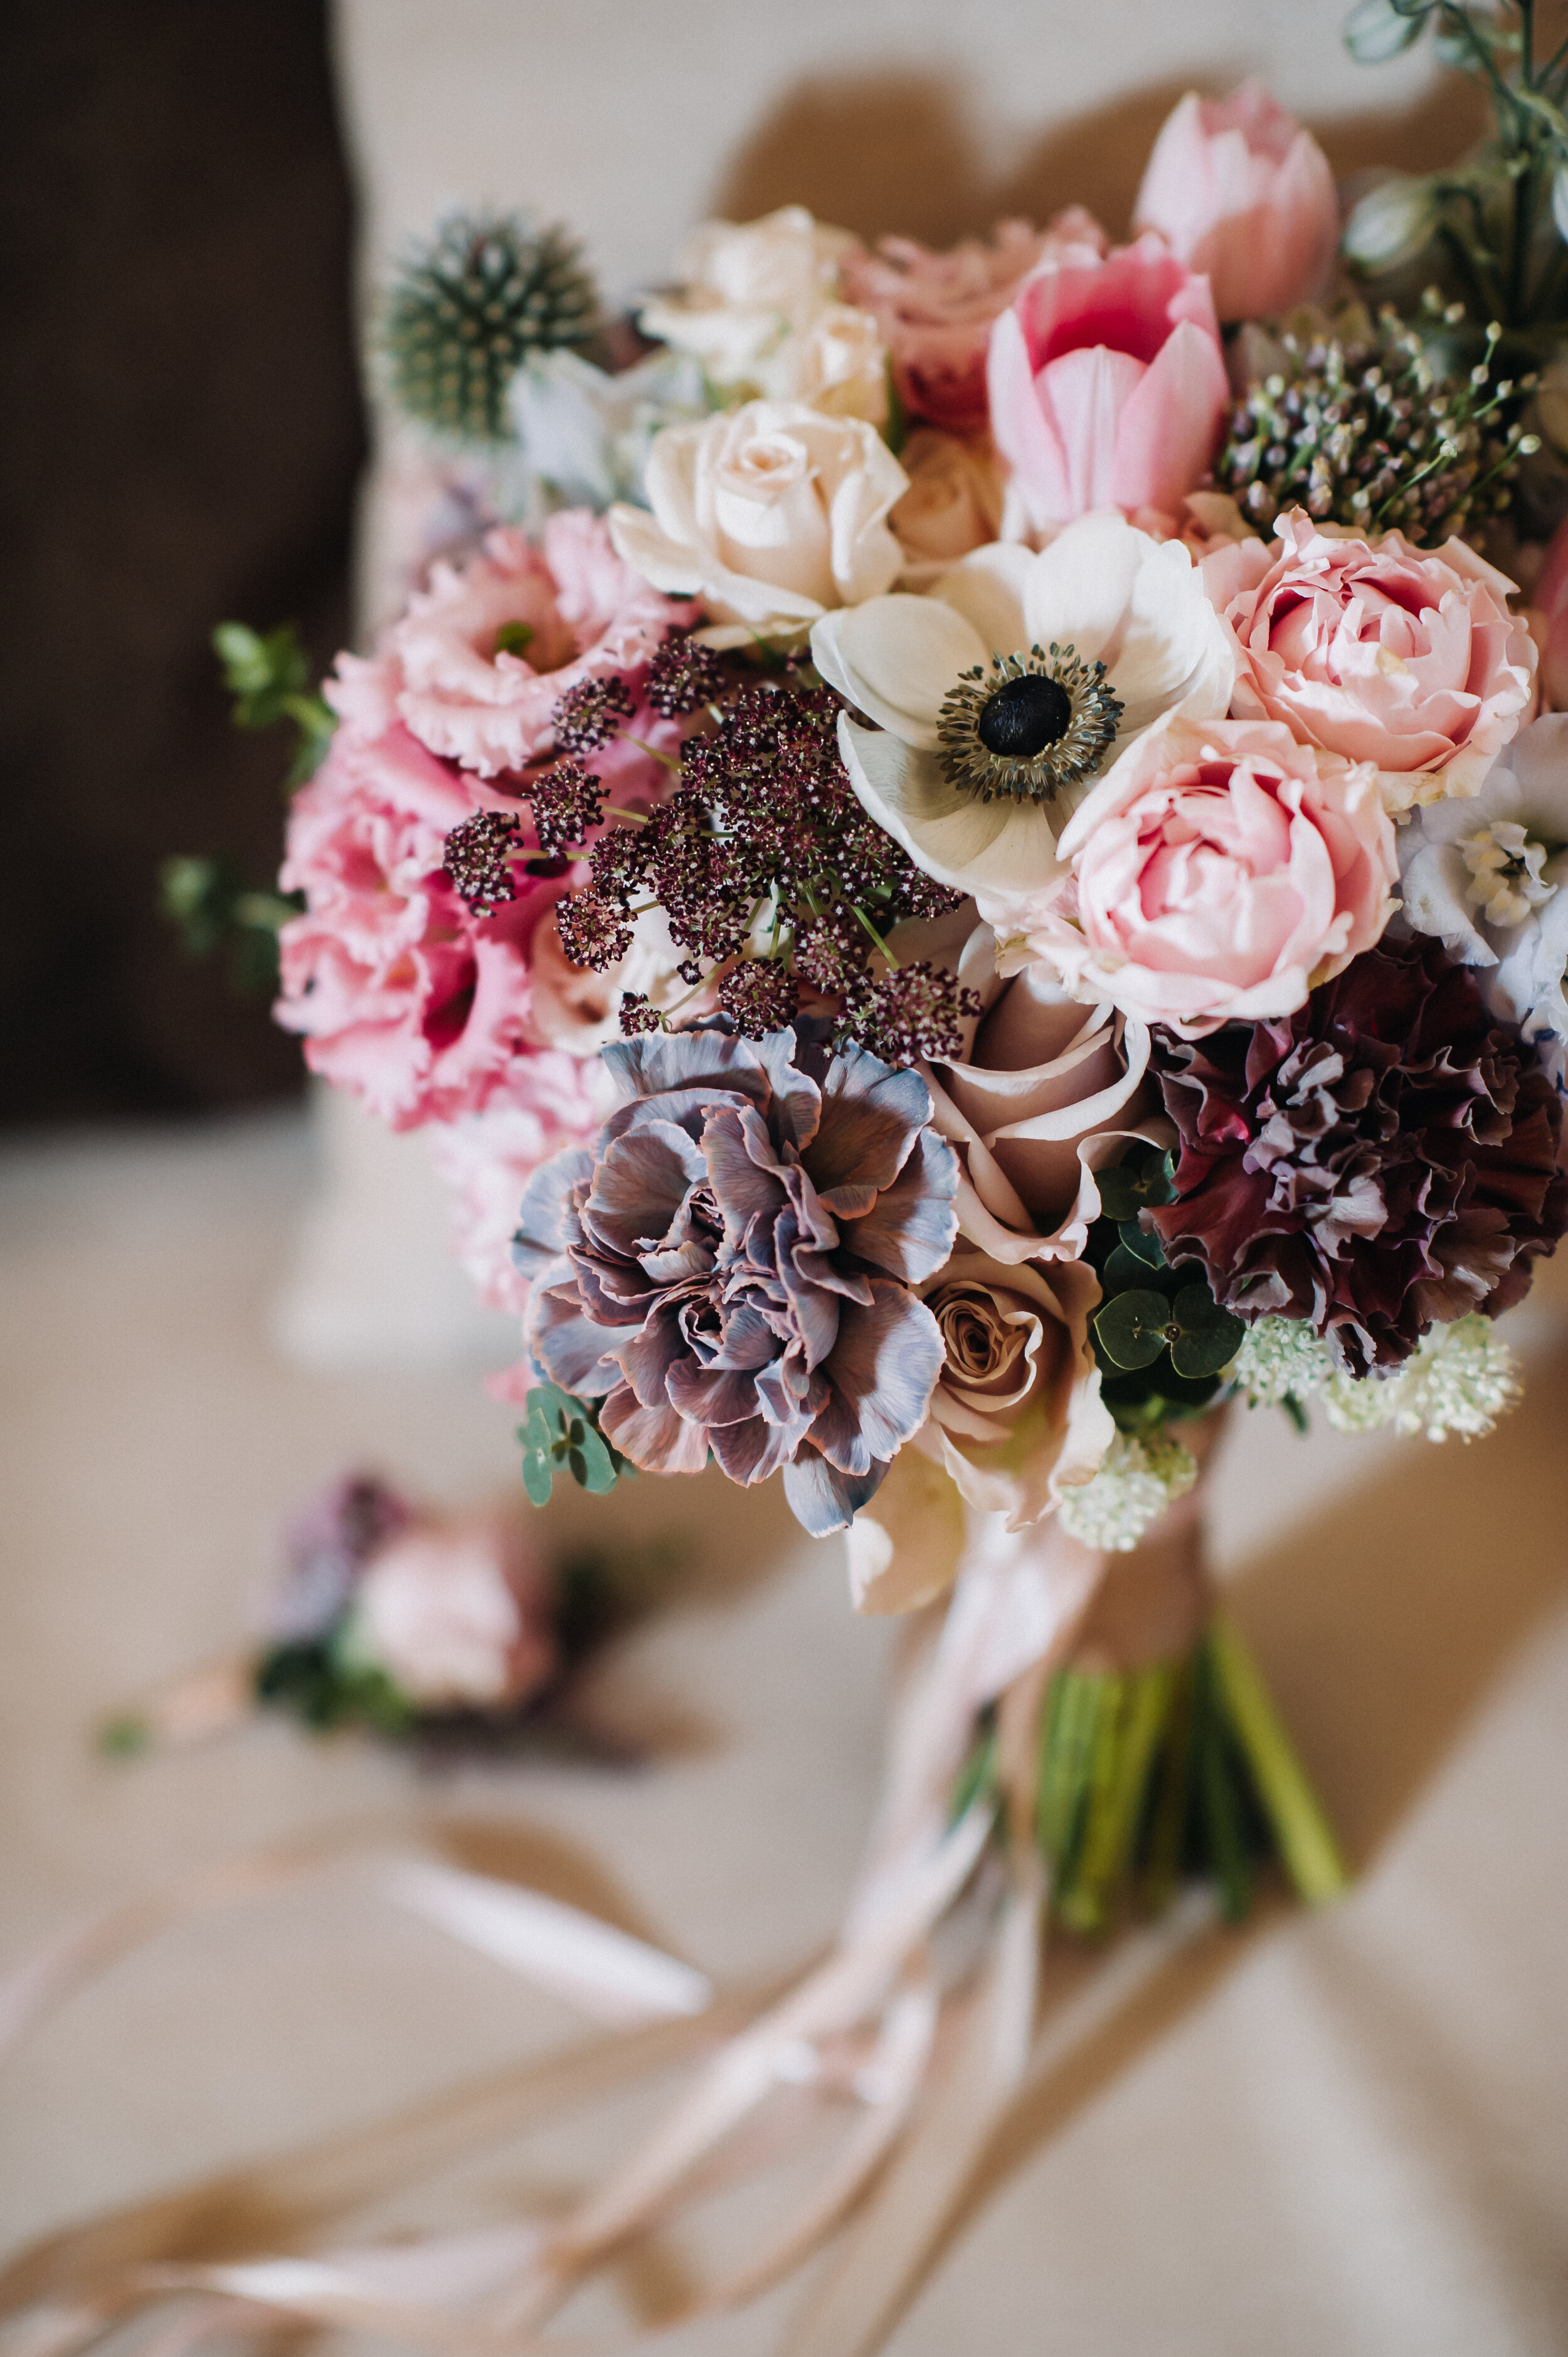 wedding-bouquet-with-roses-and-boutonniere-the-dec-MFW7BUF.JPG